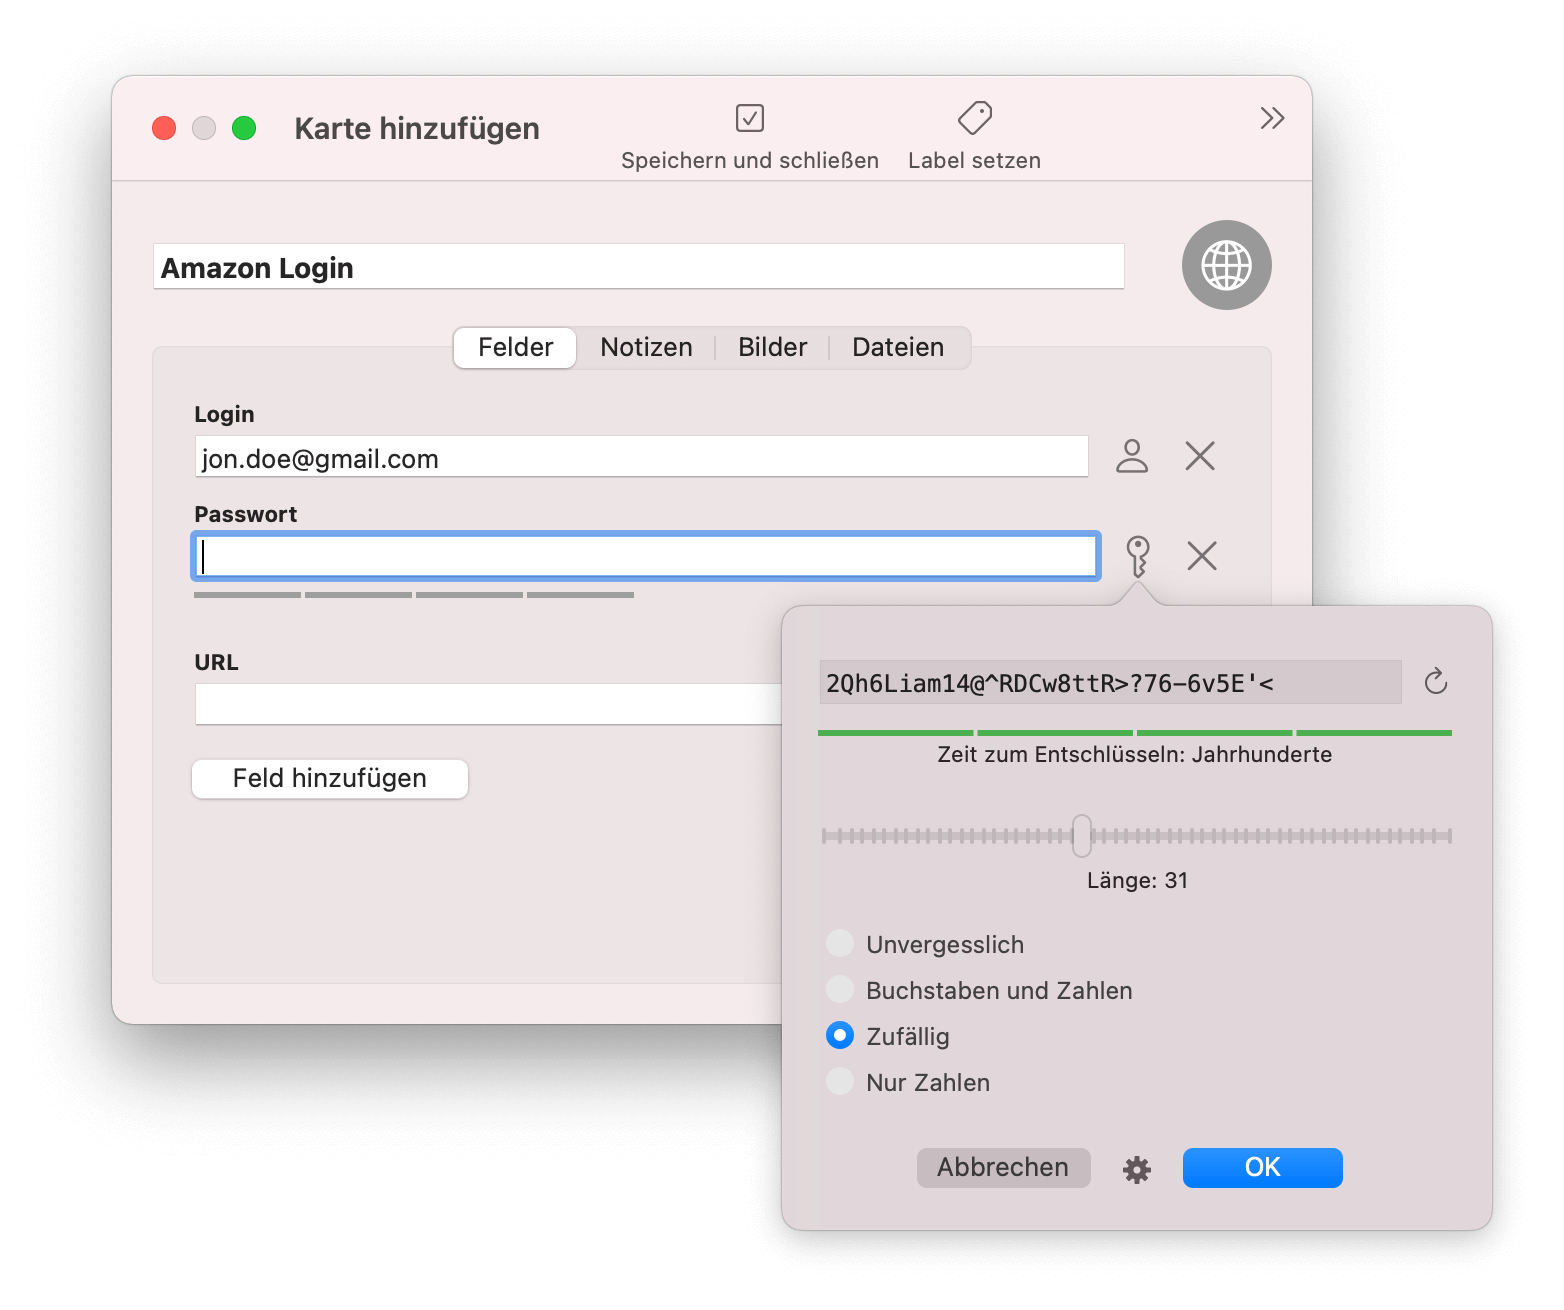 Create login with SafeInCloud password manager. As an example, a login for Amazon is created for the user jon.doe@gmail.com. Secure passwords can be generated using the integrated password generator.